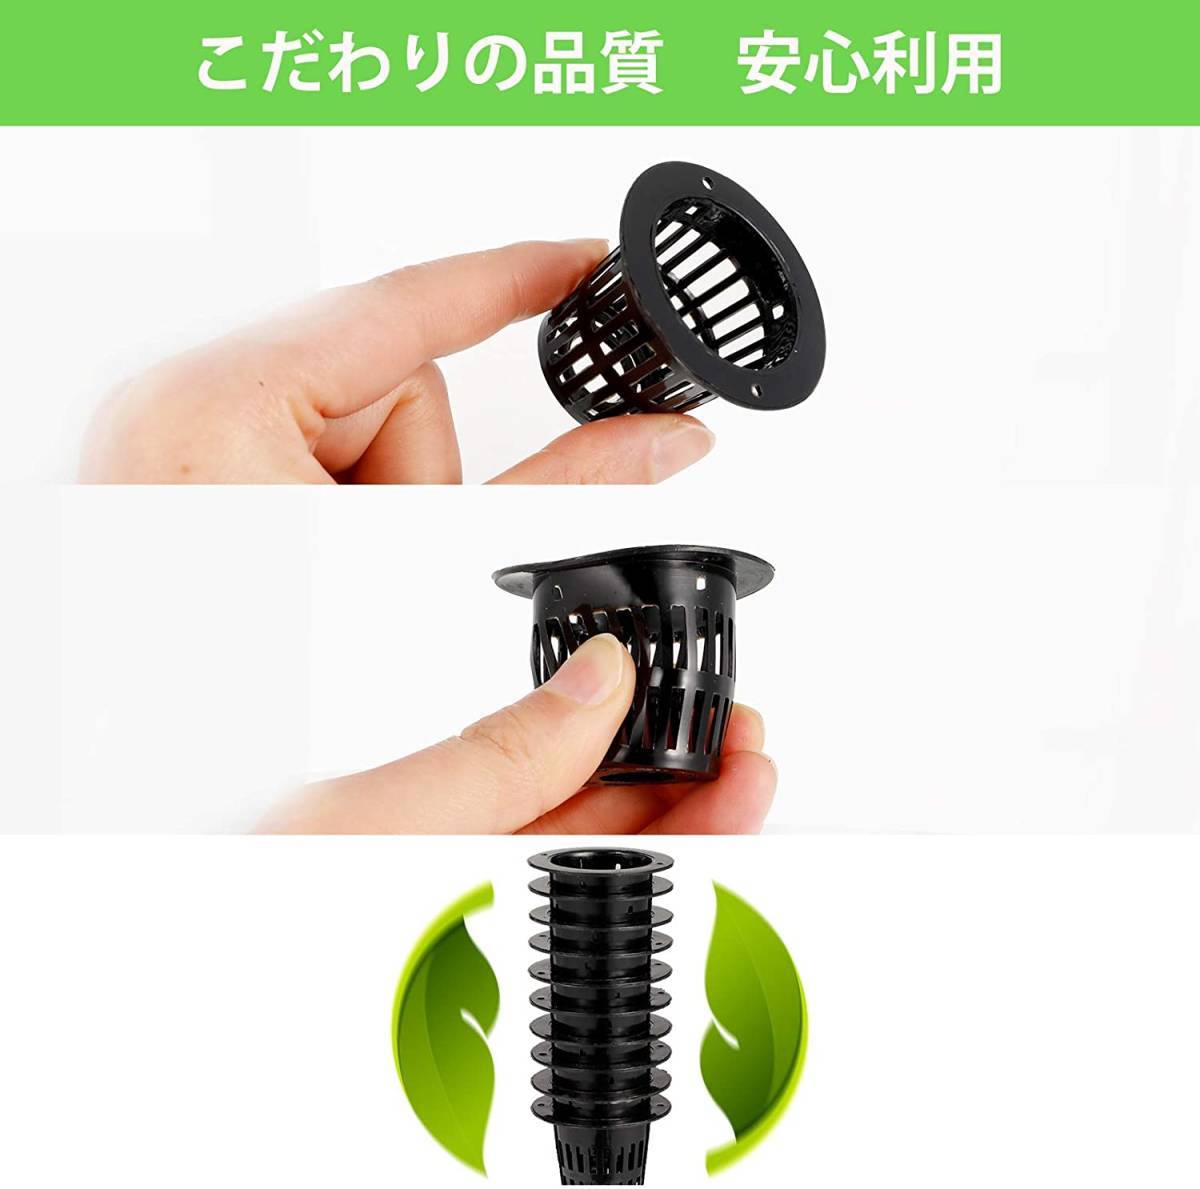 35％OFF】 水耕栽培用 ポット スポンジ 各30個セット プラスチック 水耕栽培キット 育成ポット 水耕栽培鉢 室内 キッチン 野菜作り 